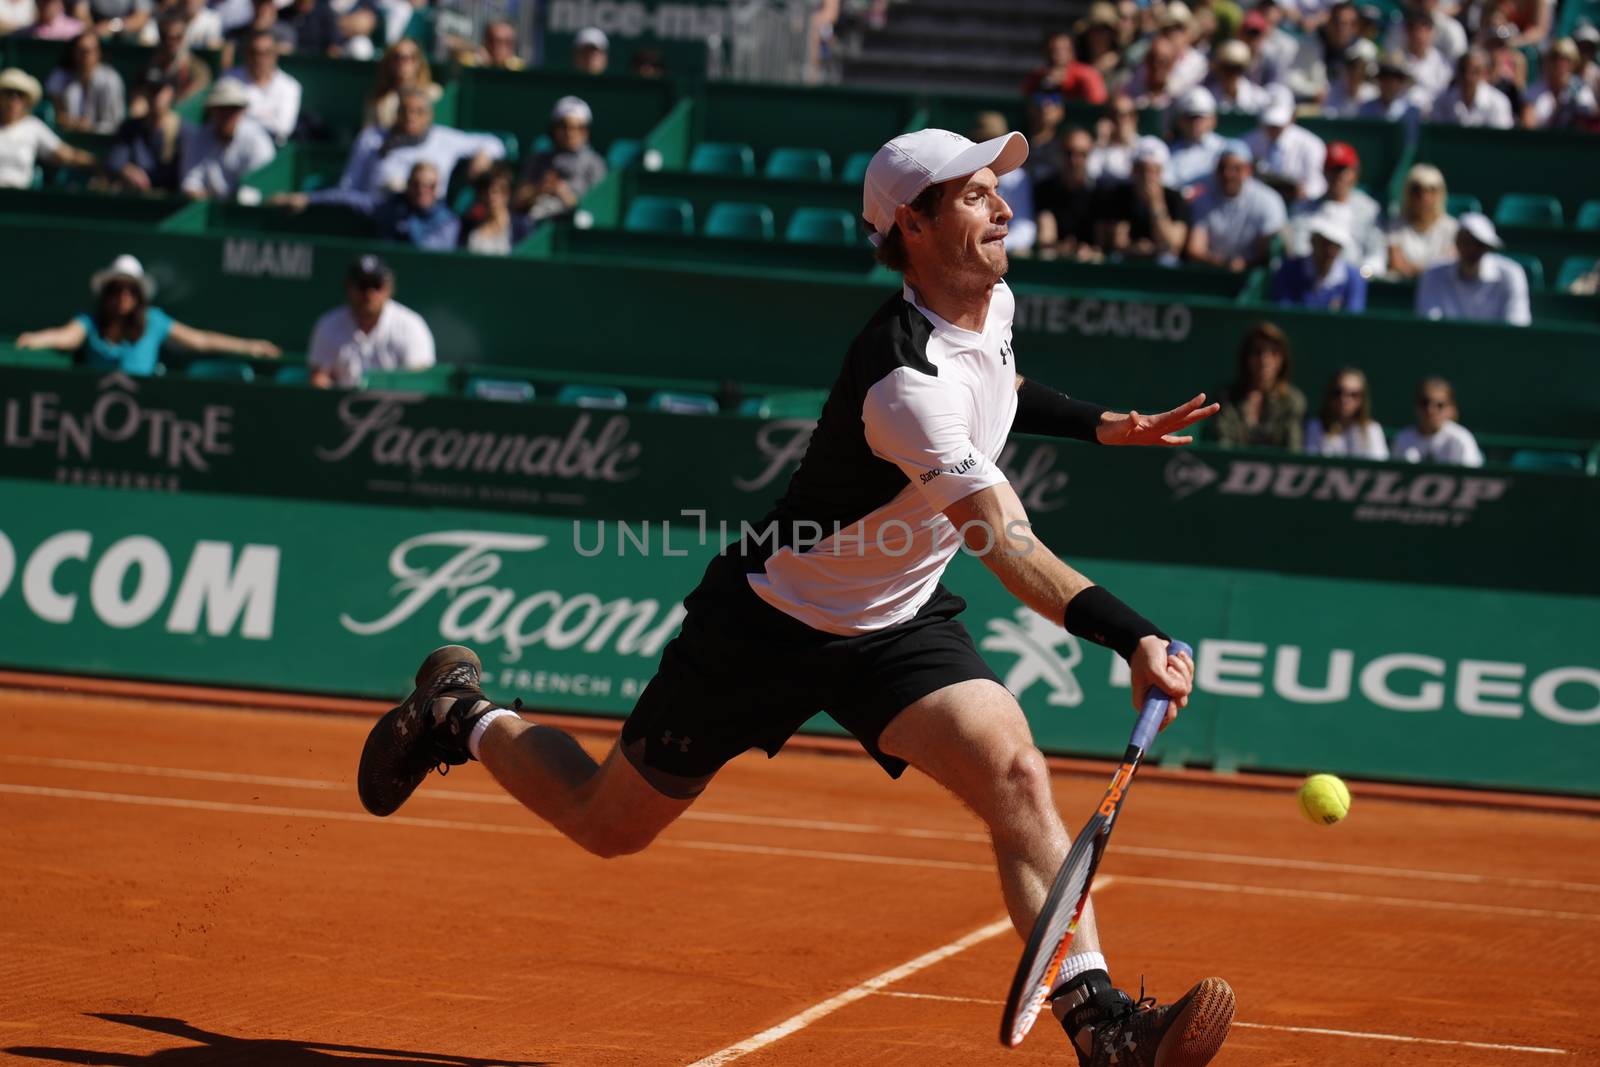 MONTE-CARLO, Monaco: British player Andy Murray stretches to hit a forehand during a game against Benoit Paire on April 14, 2016 as part of the Monte Carlo Rolex Masters.